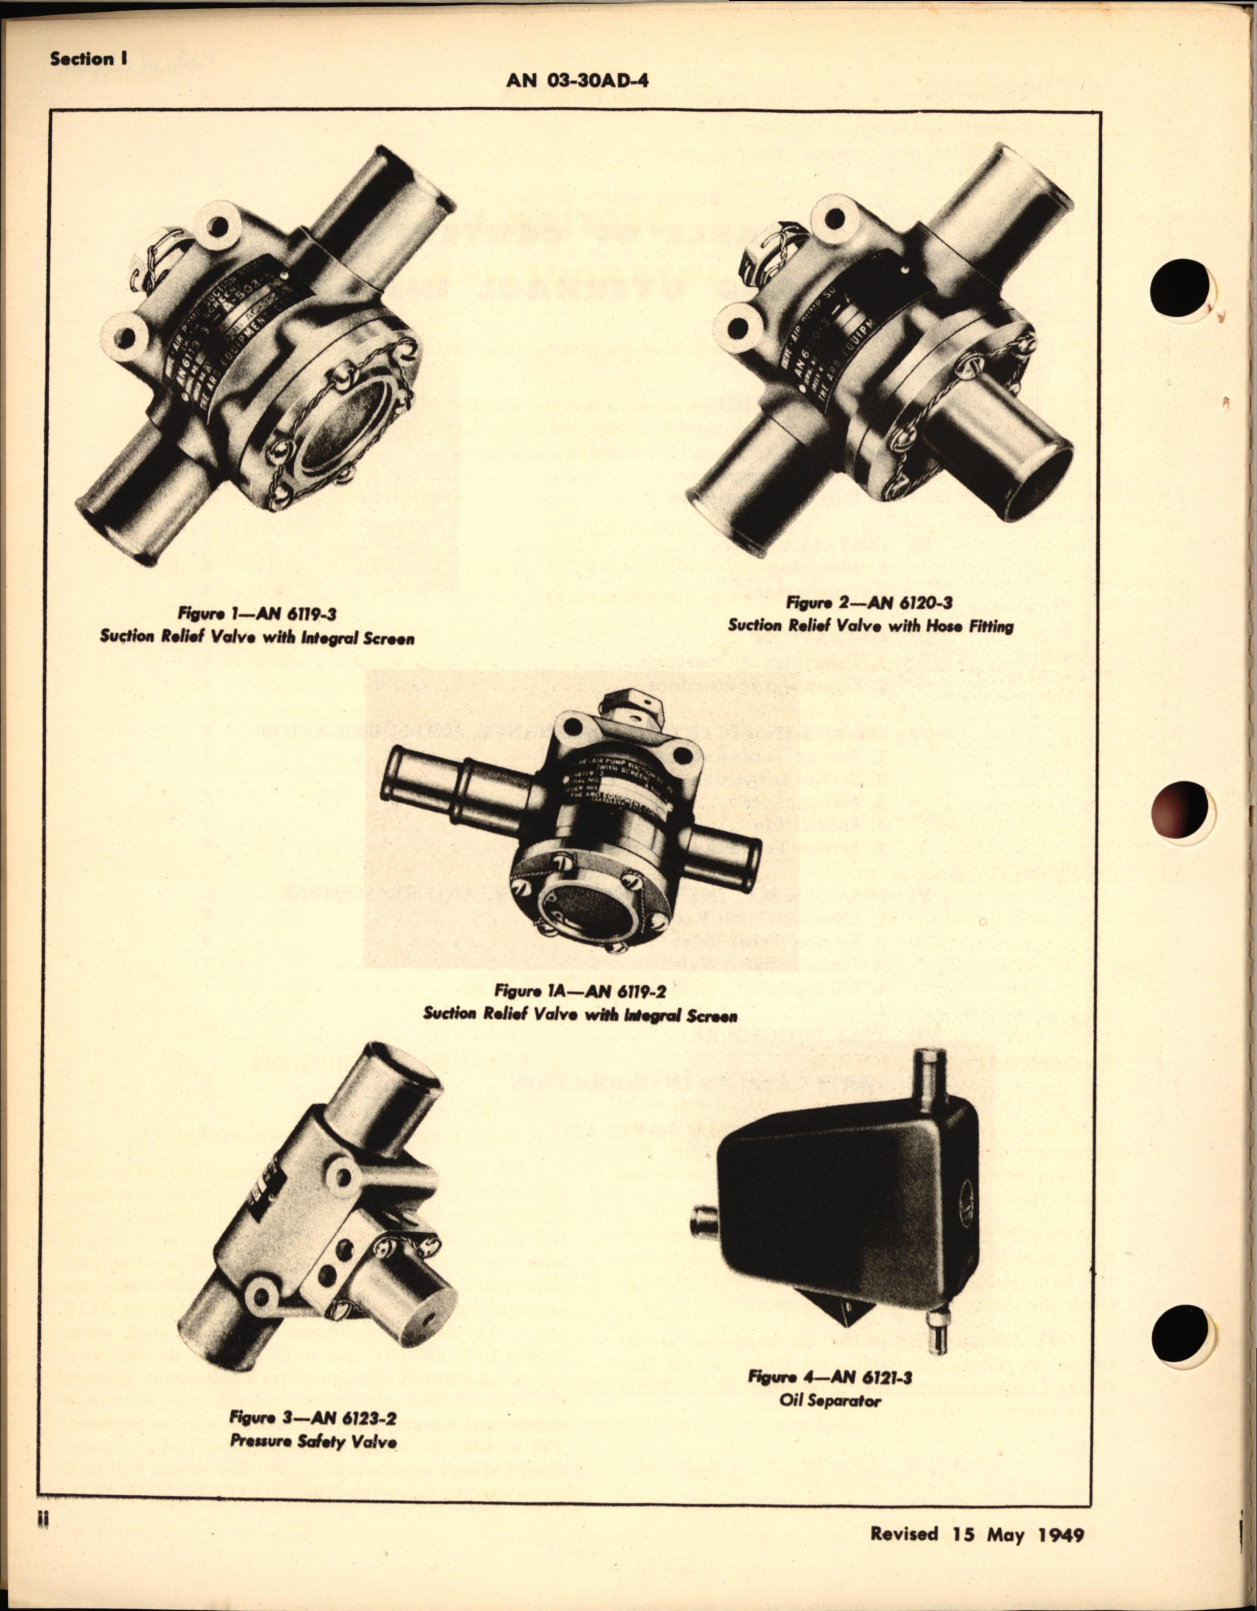 Sample page 4 from AirCorps Library document: Handbook Operation, Service, and Overhaul Instructions with Parts Catalog for Relief Valves, Safety Valve and Oil Separator 